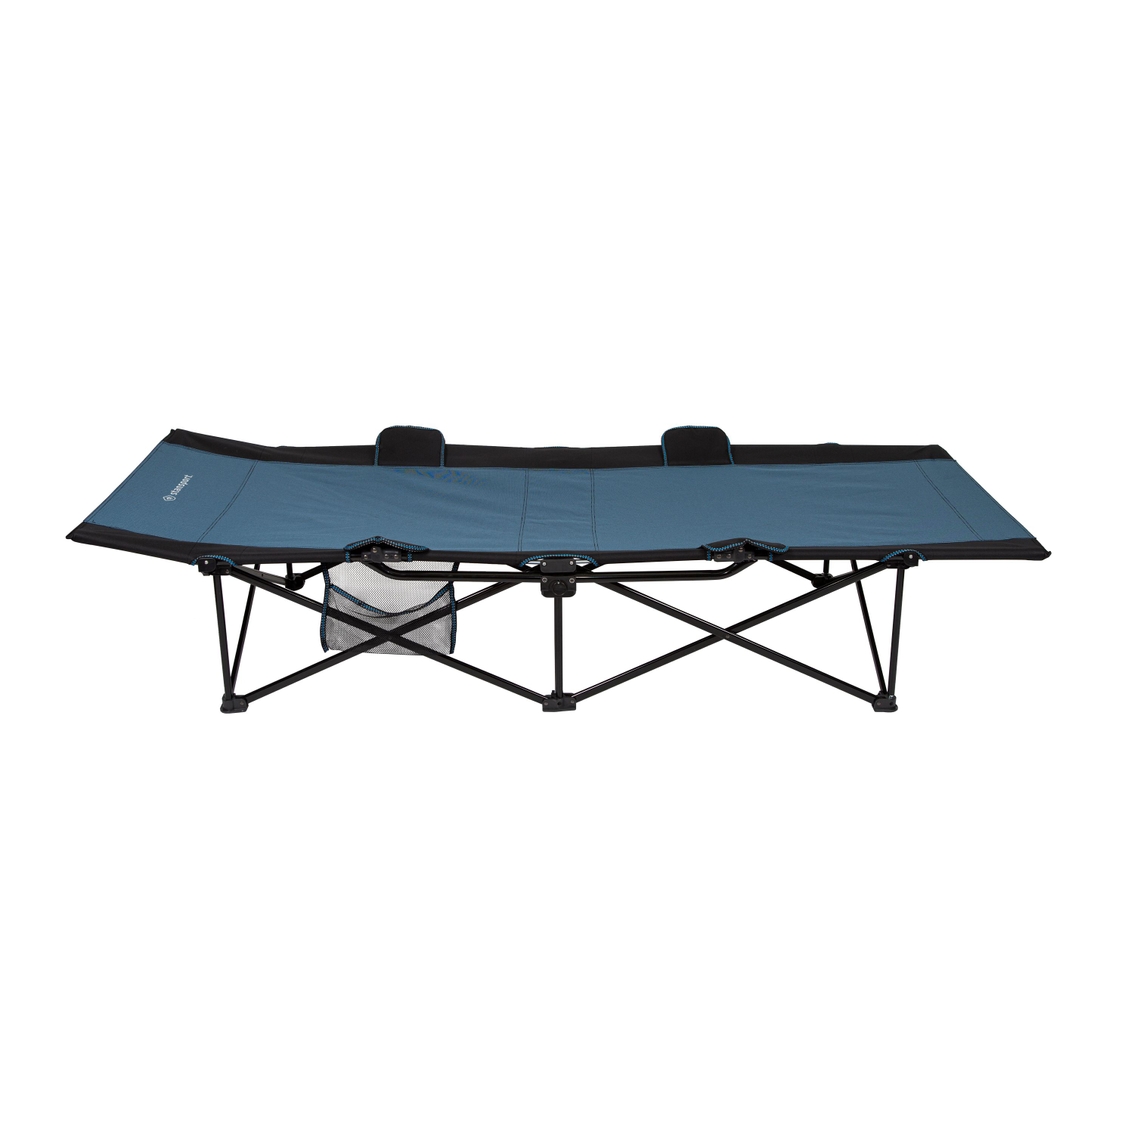 Stansport Heavy Duty Camp Cot - Image 2 of 5